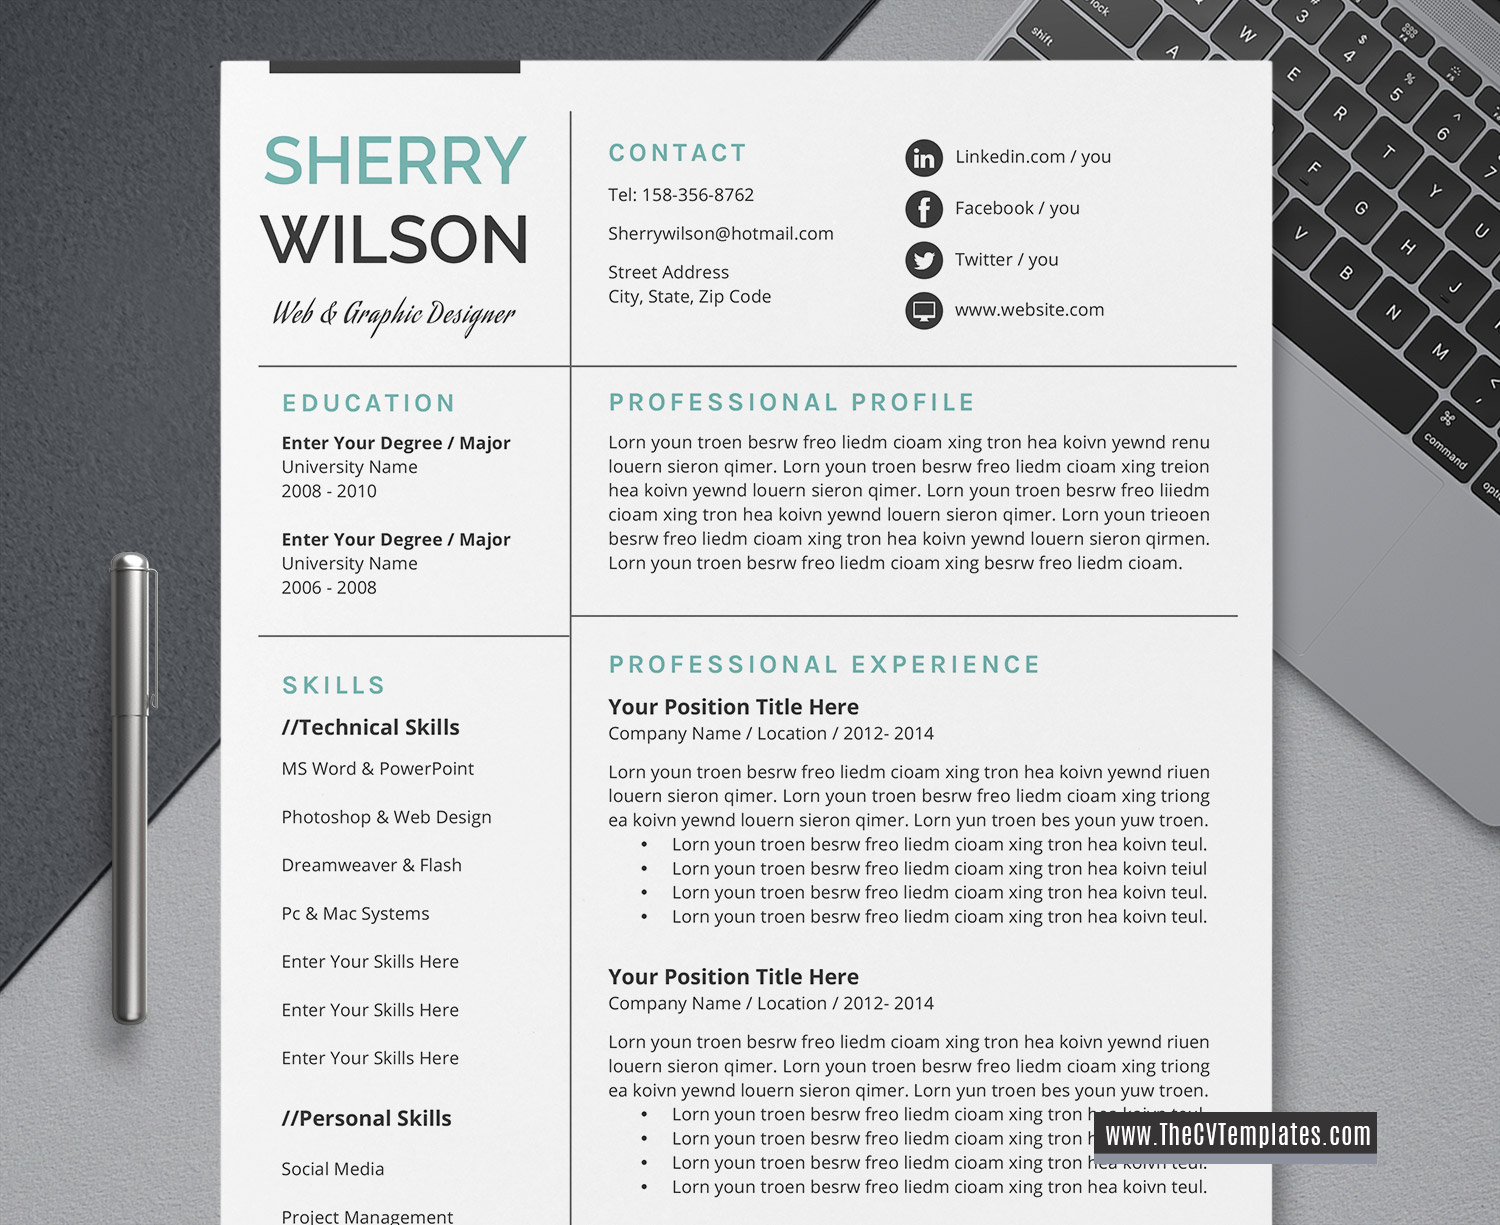 Simple Professional Cv Template Word : 25+ Professional MS Word Resume Templates With Simple ... - The professional resume format doc has two different color schemes to choose from.